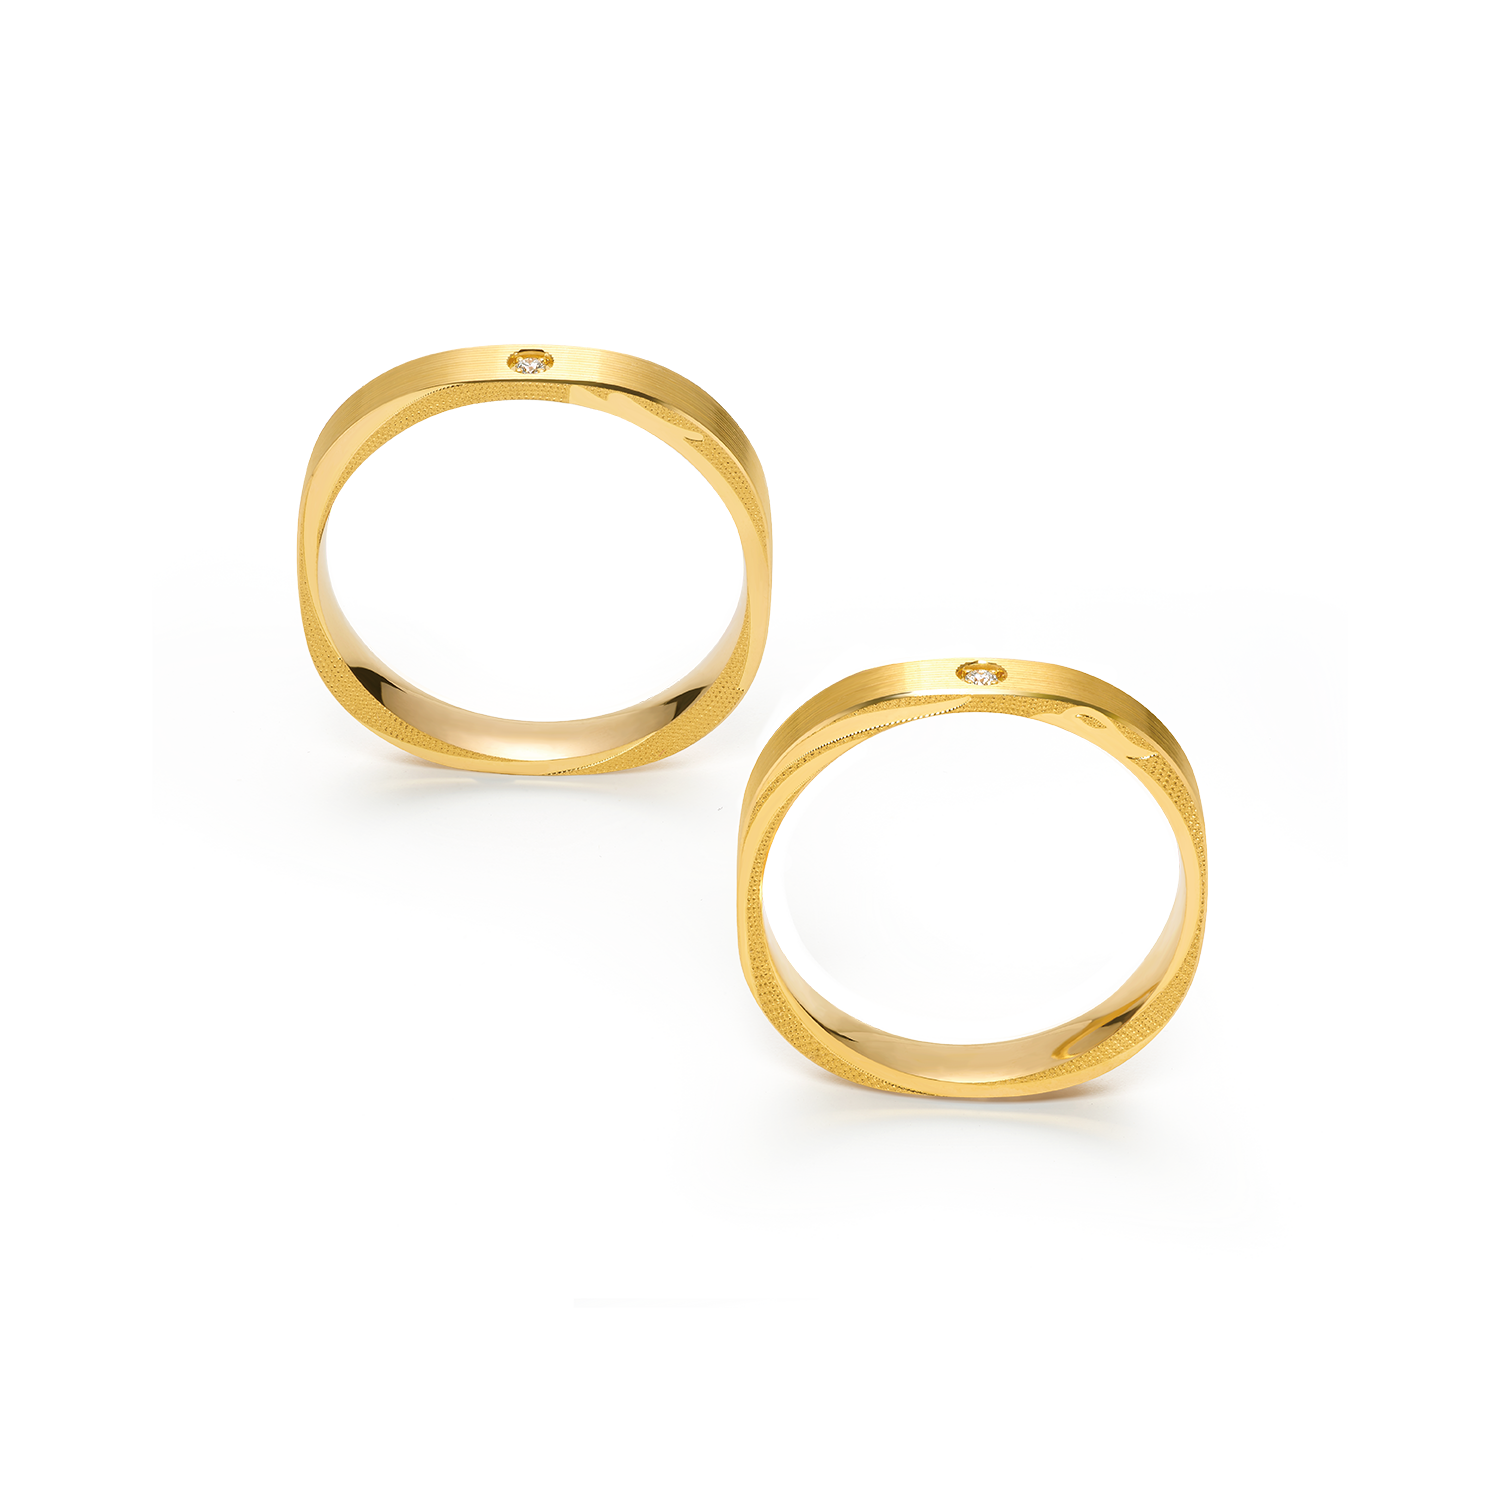 Goldstyle•X "Well-matched Couple" Gold Diamond Wedding Rings